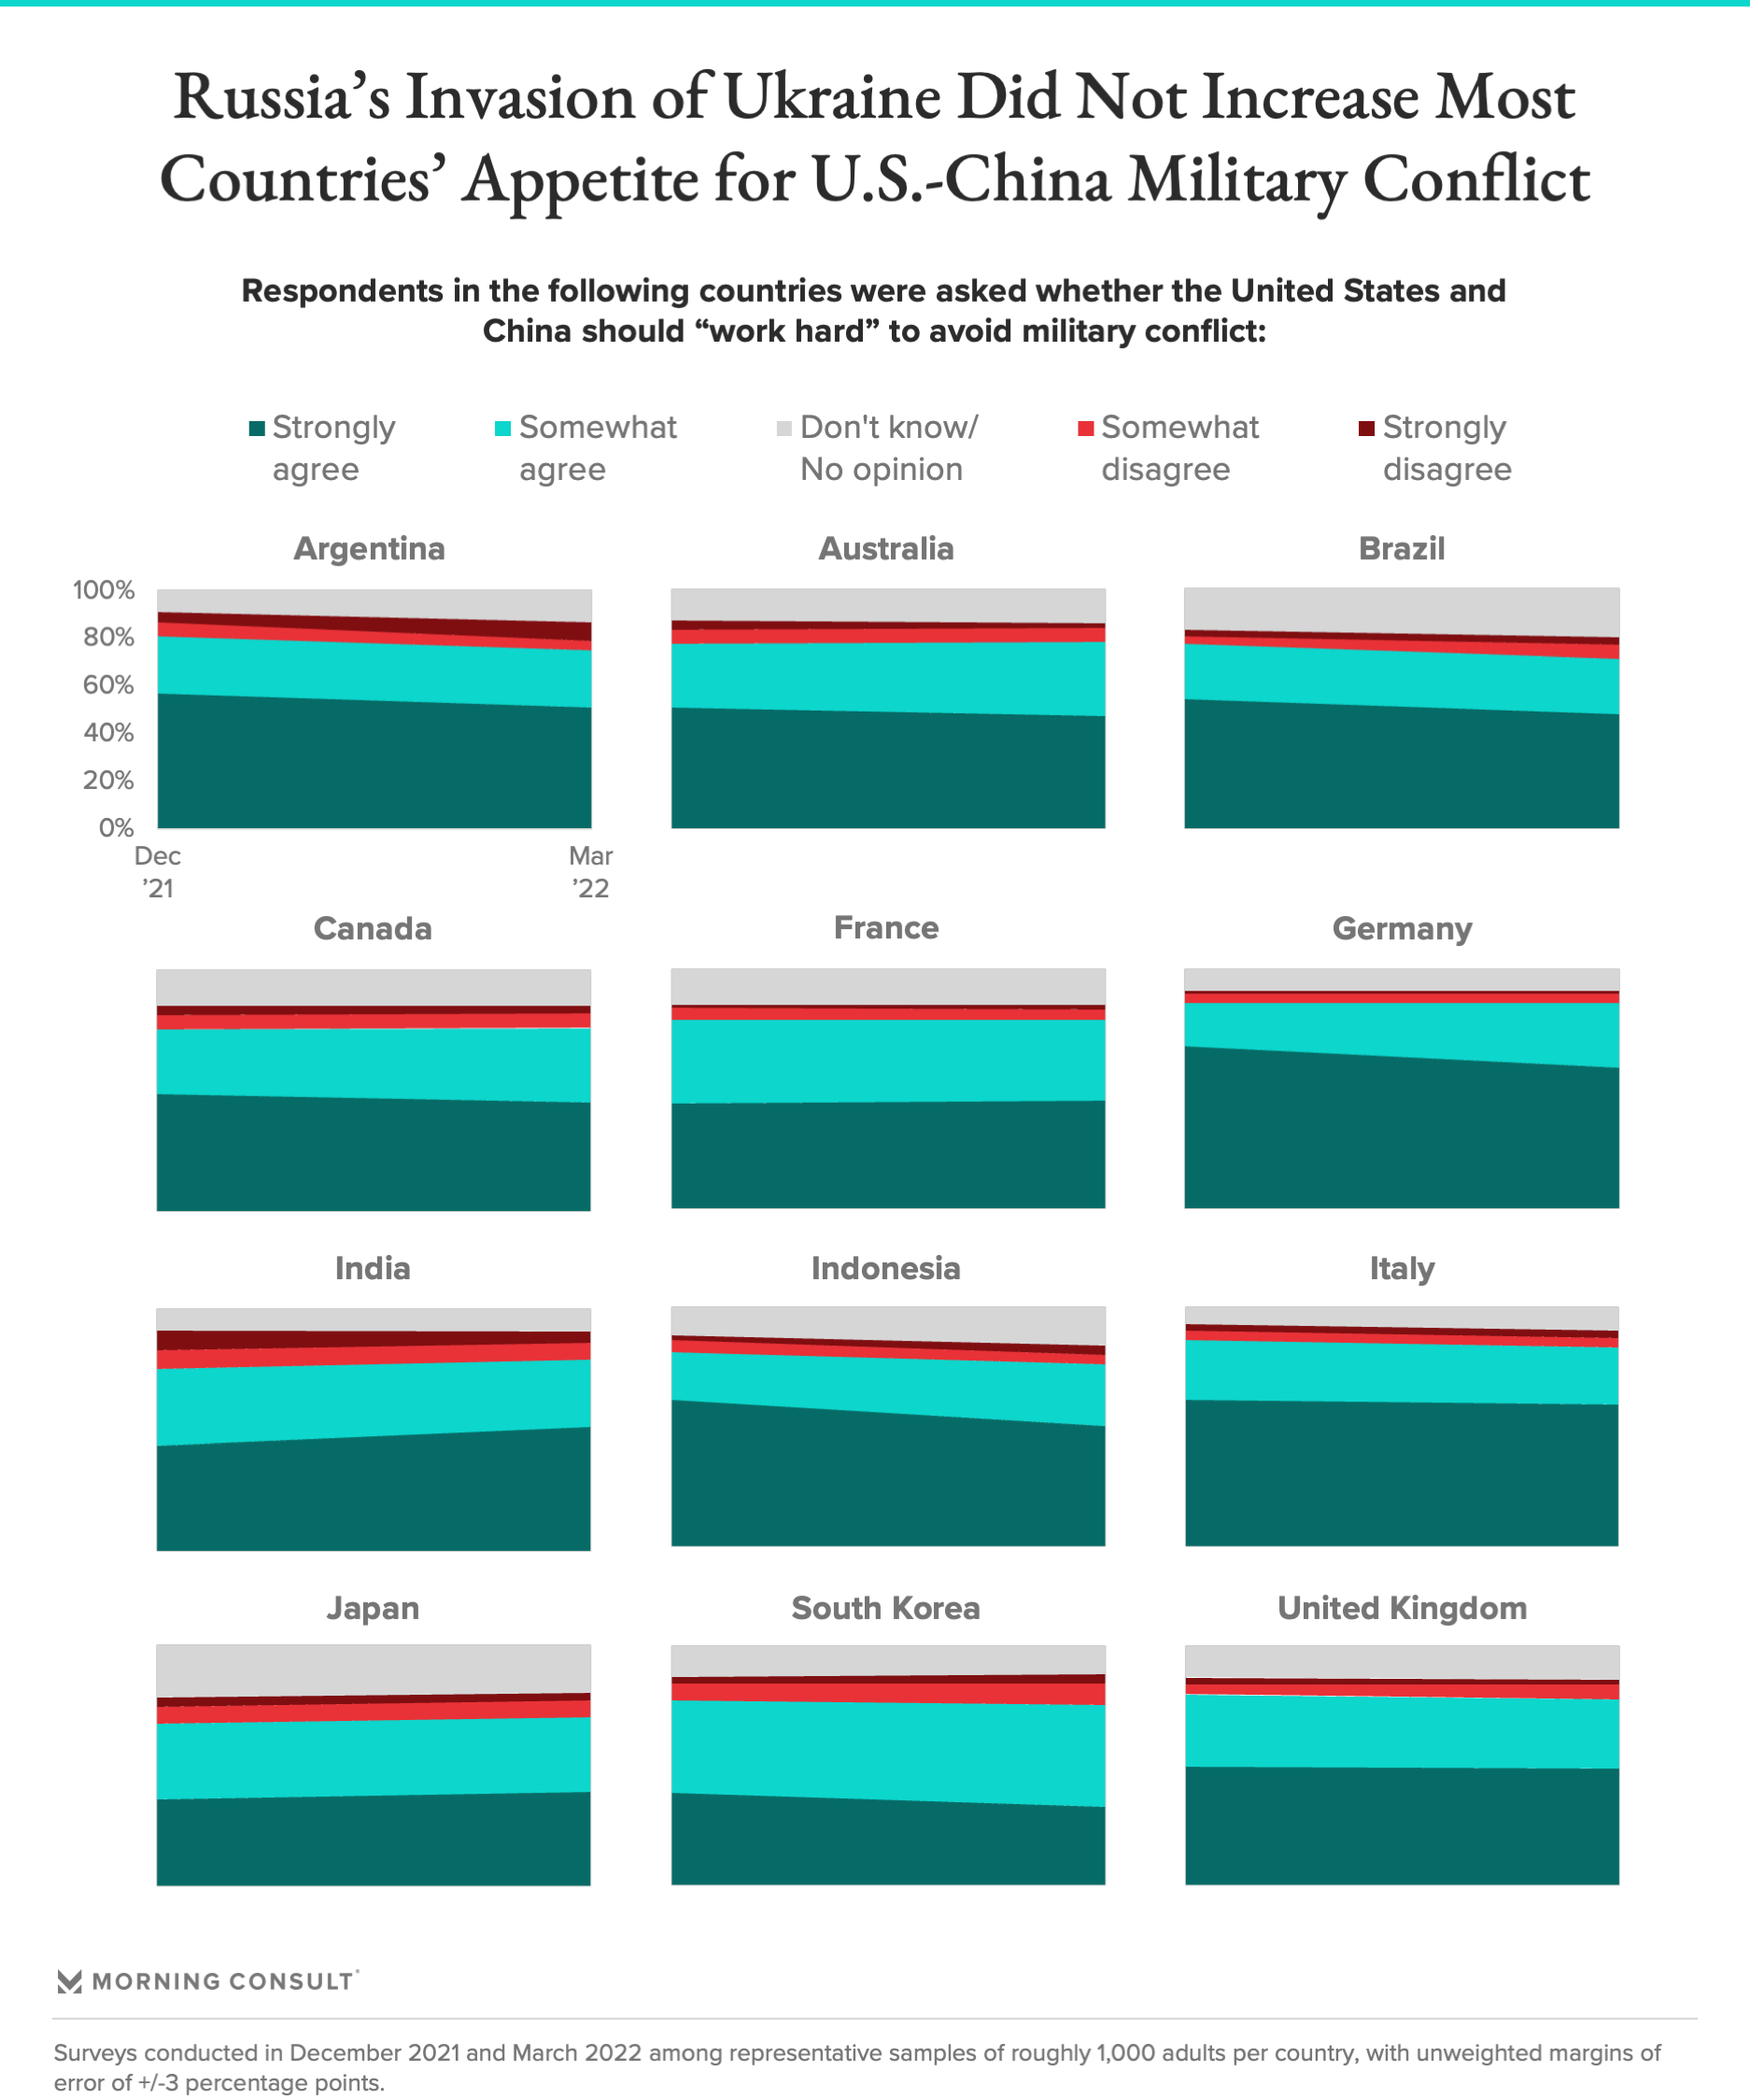 Area charts showing opinions as to whether the U.S. and China should avoid military conflict, by country